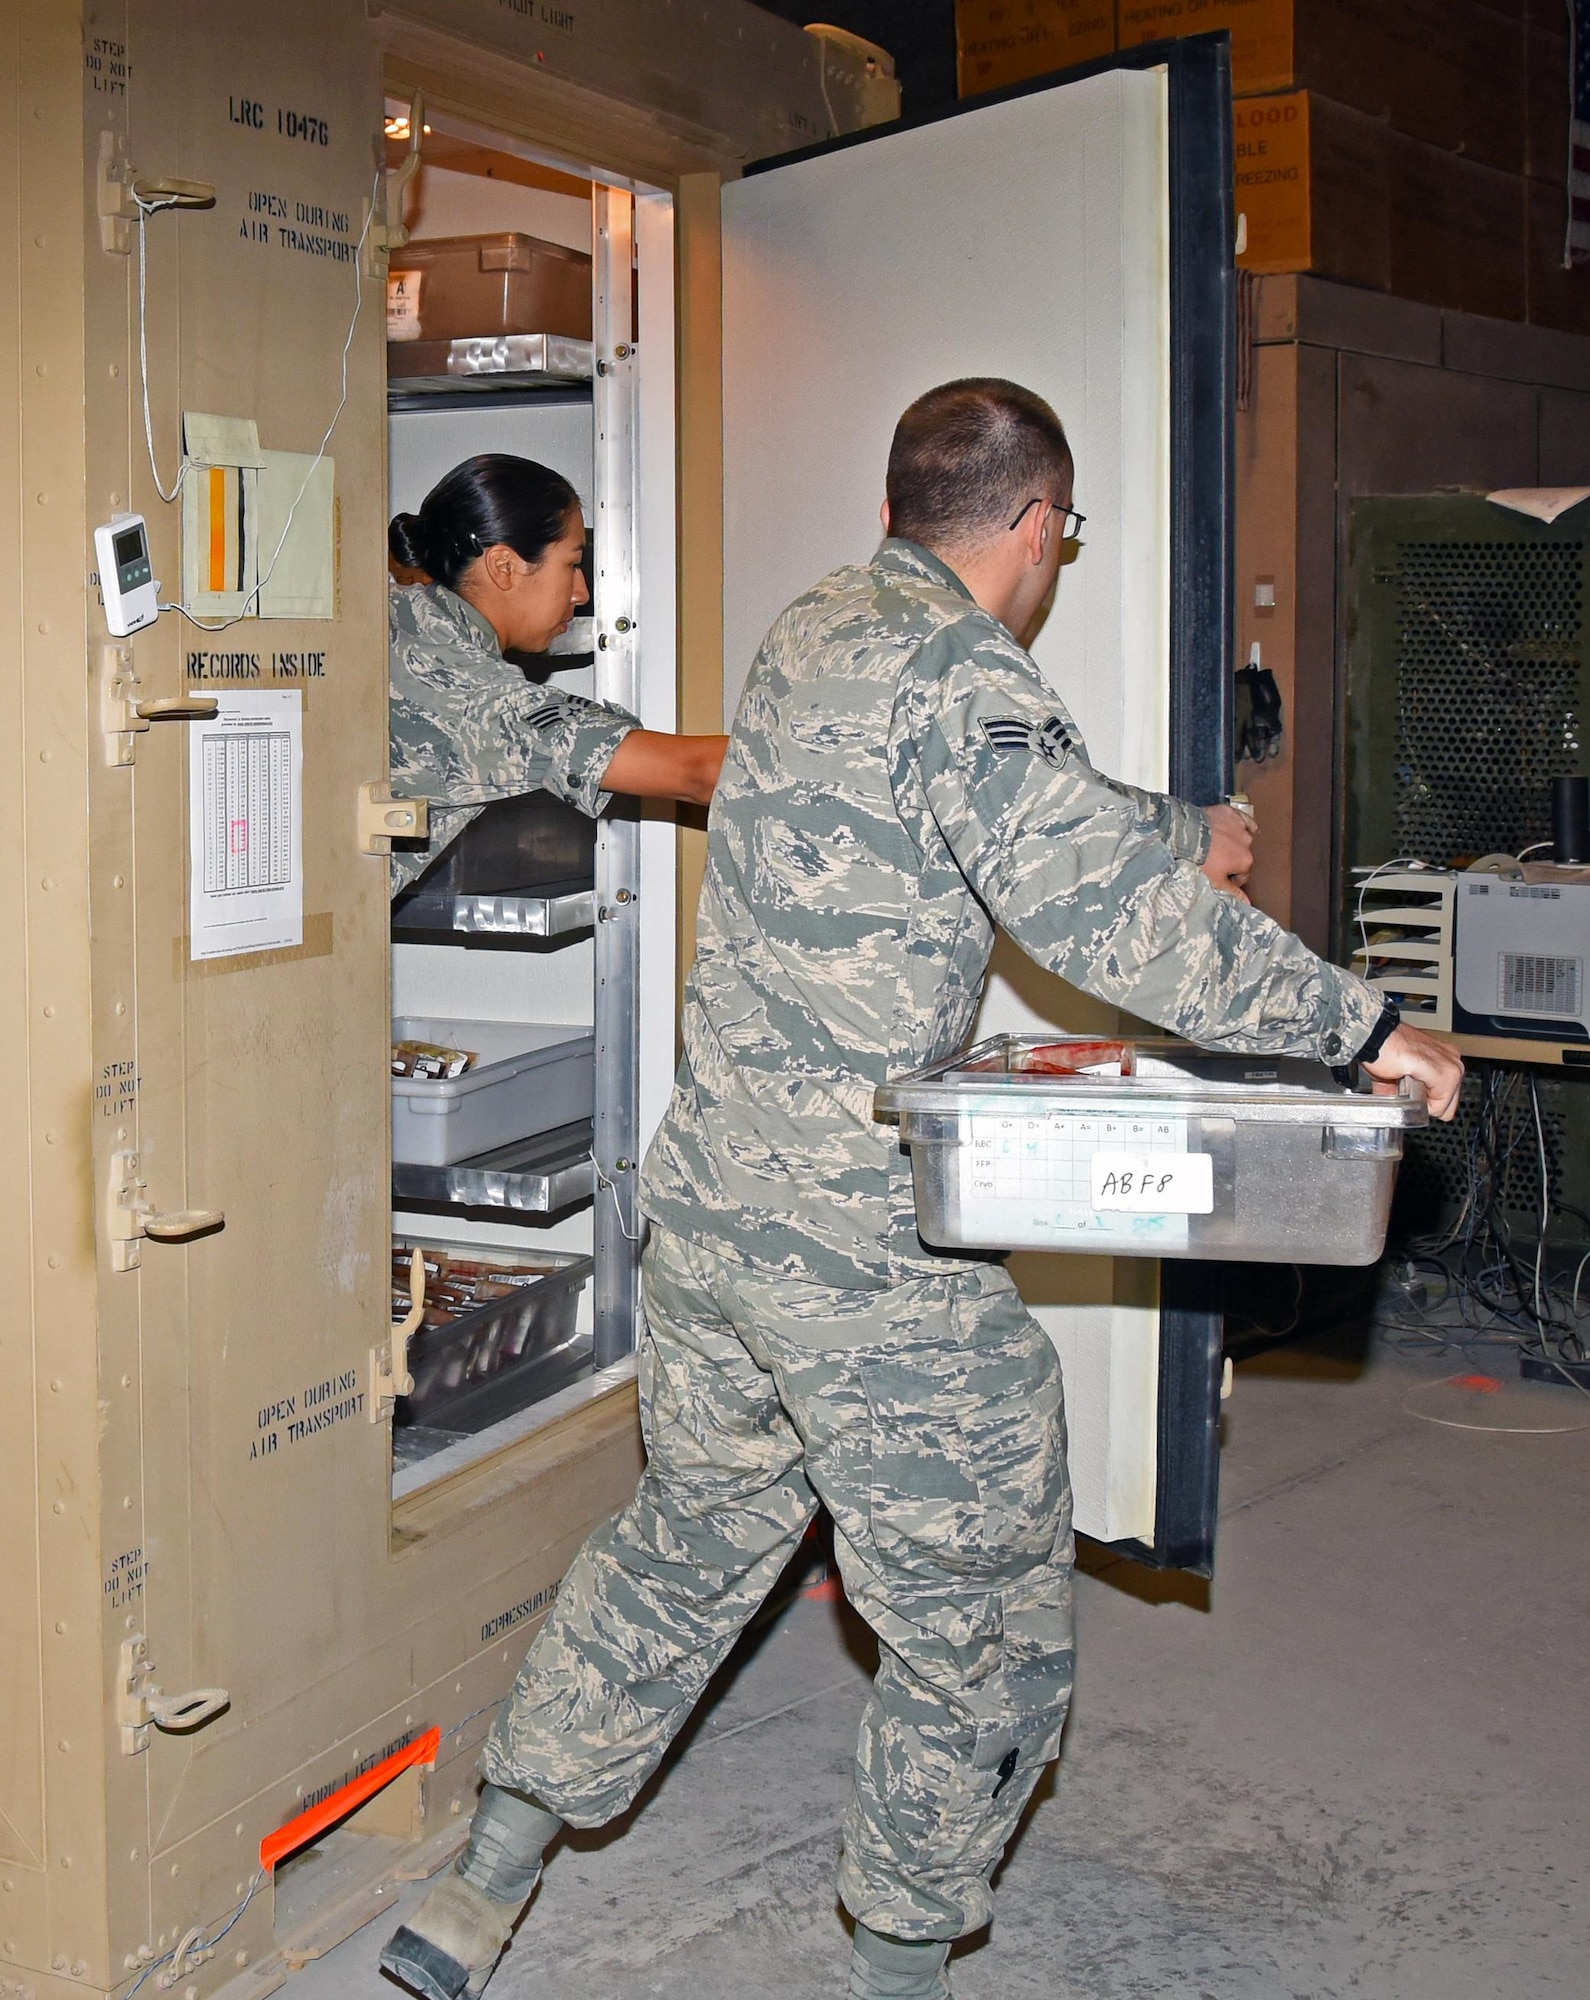 U.S. Air Force Senior Airman Celina Garcia, a medical logistics technician, left, and U.S. Air Force Senior Airman Dean Blackmore, a medical laboratory technician, both with the 379th Expeditionary Medical Group blood transshipment center, select blood units for shipment at Al Udeid Air Base, Qatar, Jan. 27, 2017. These Airmen operate primarily at night due to the strict temperature regulations in place to keep blood units viable. (U.S. Air Force photo by Senior Airman Cynthia A. Innocenti)